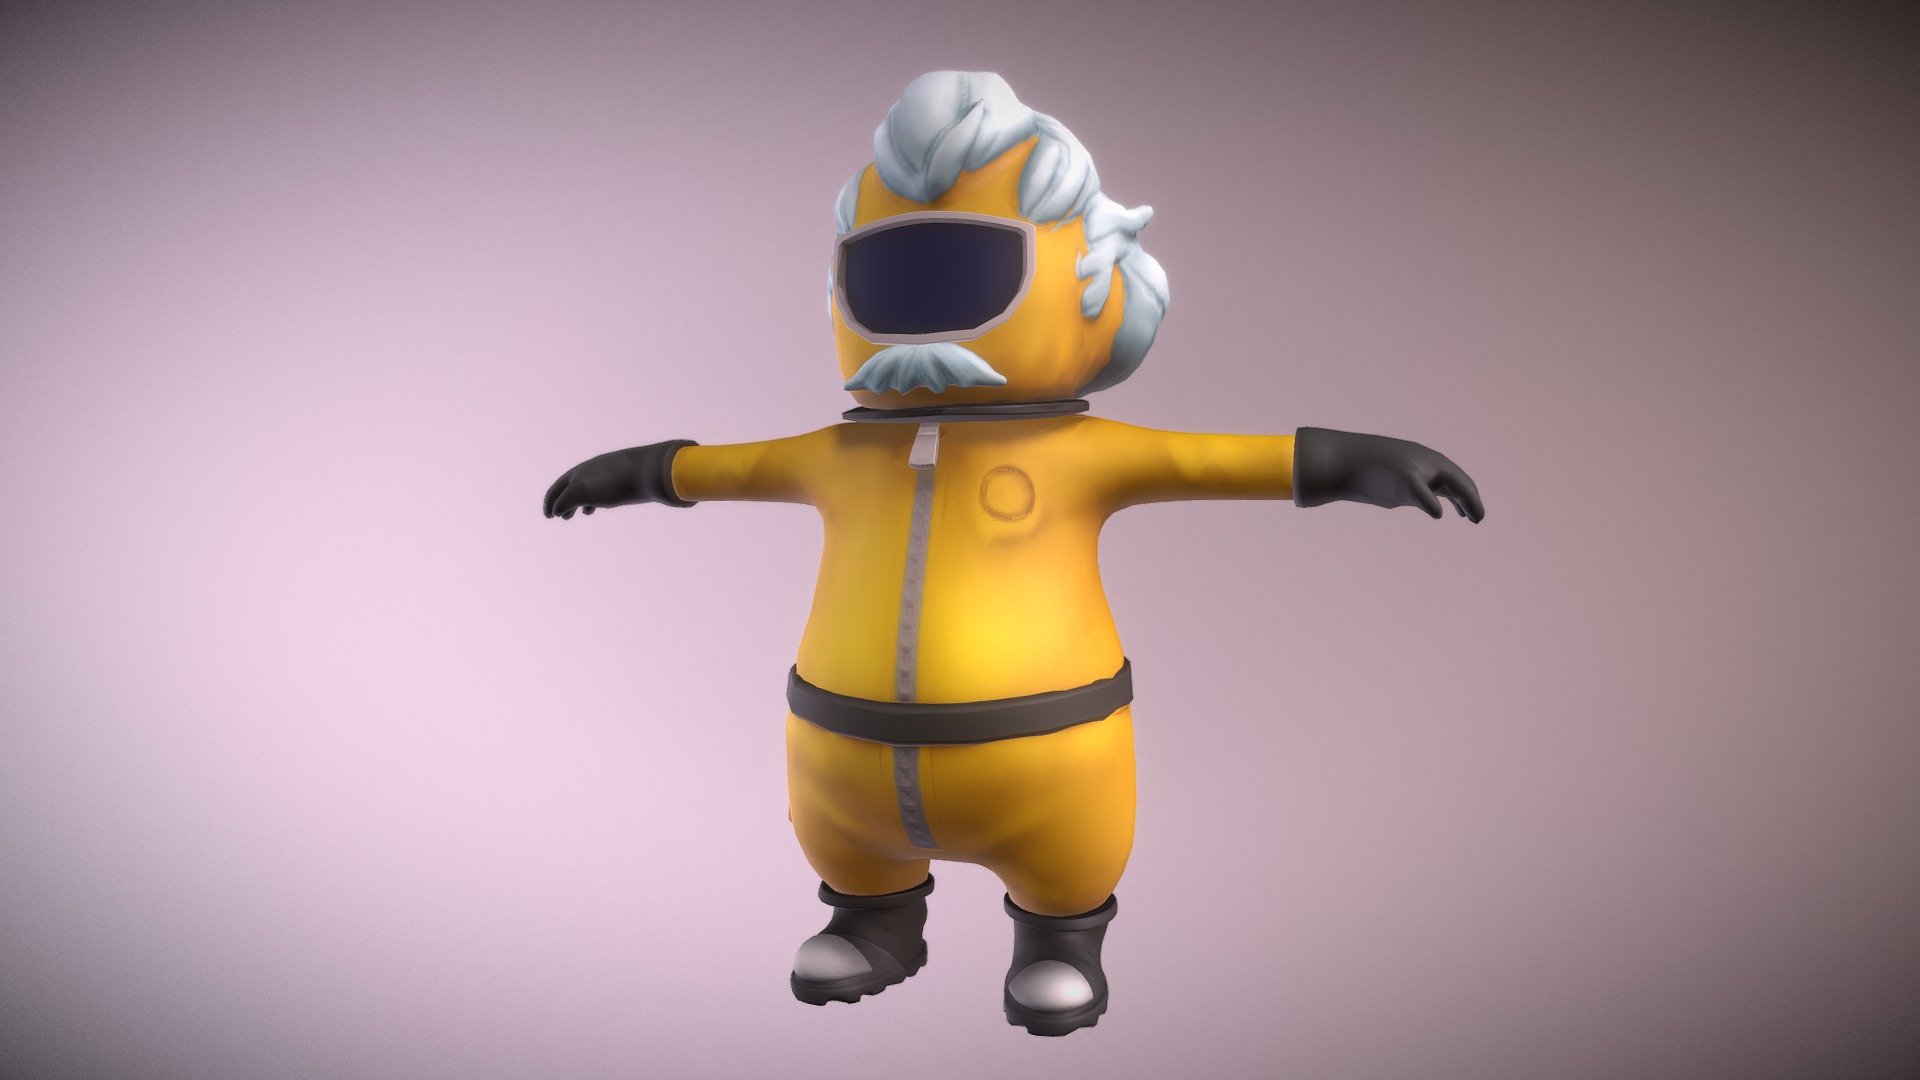 Main Character of a short animated film done for a University Project. I'm aware I could have saved some polycount in the boots but I just ZRemeshed them for speed. Here's a link to my blog post on this character: https://lockosblog.wordpress.com/2018/01/10/the-scientist-animated-short/ - The Scientist - 3D model by ItsLocko 3d model